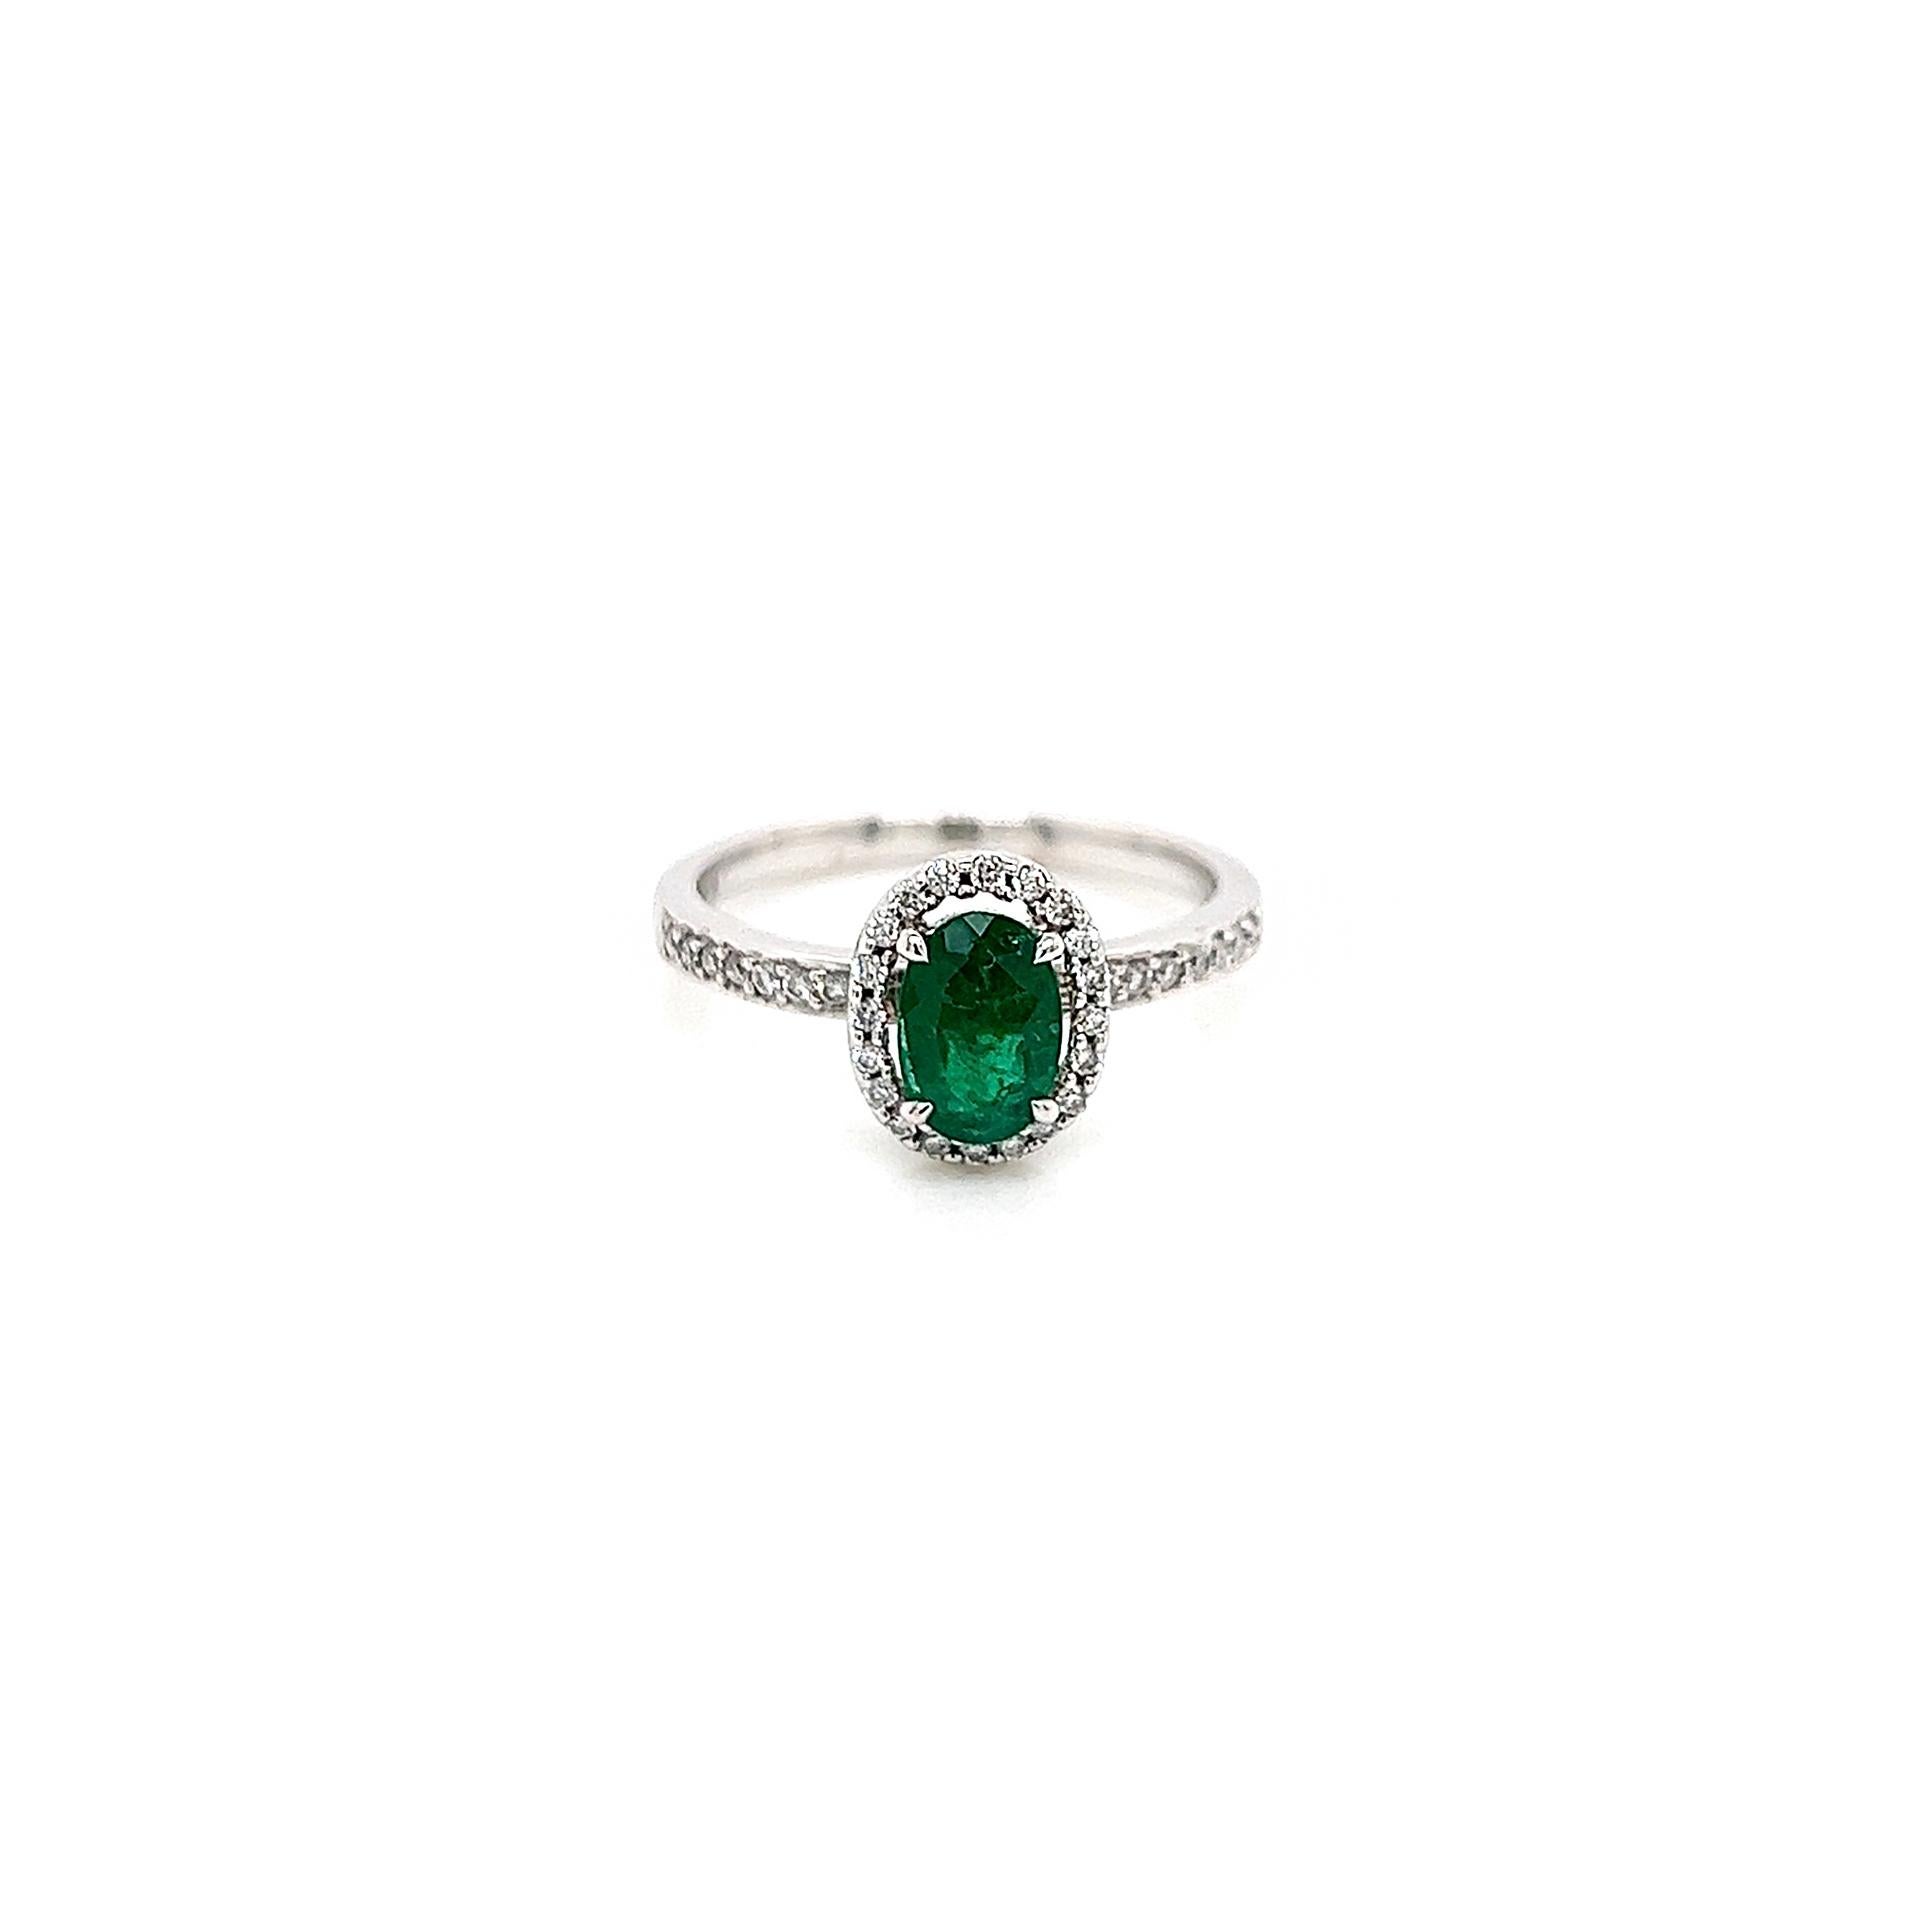 0.74Carat Green Emerald and Diamond Ladies Ring

-Metal Type: 18K White Gold
-0.55Carat Round Columbian Green Emerald
-0.19Carat Round Natural Diamonds, G-H Color, SI Clarity
-Size 6.5

Made in New York City